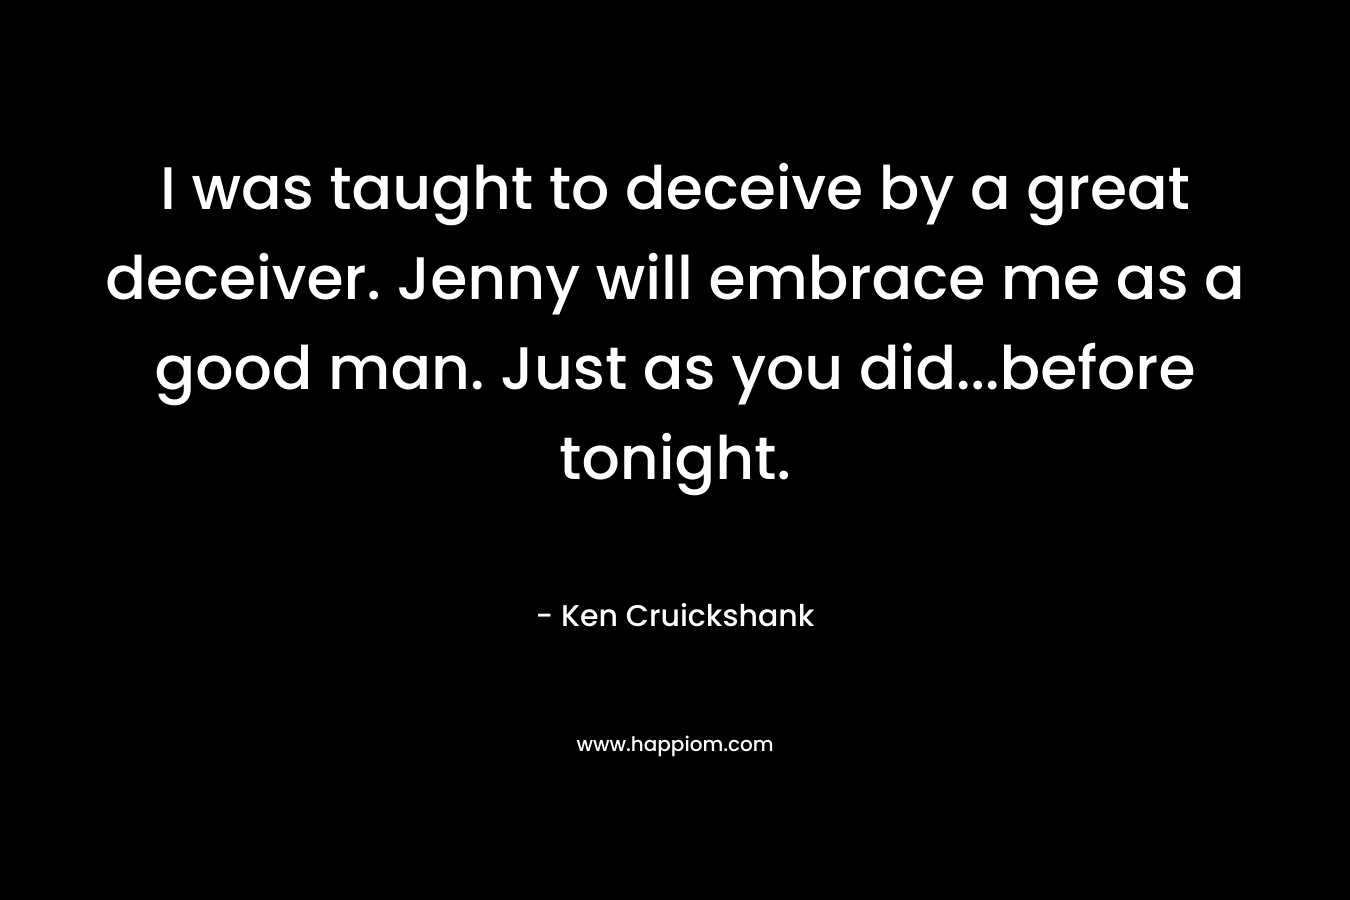 I was taught to deceive by a great deceiver. Jenny will embrace me as a good man. Just as you did...before tonight.